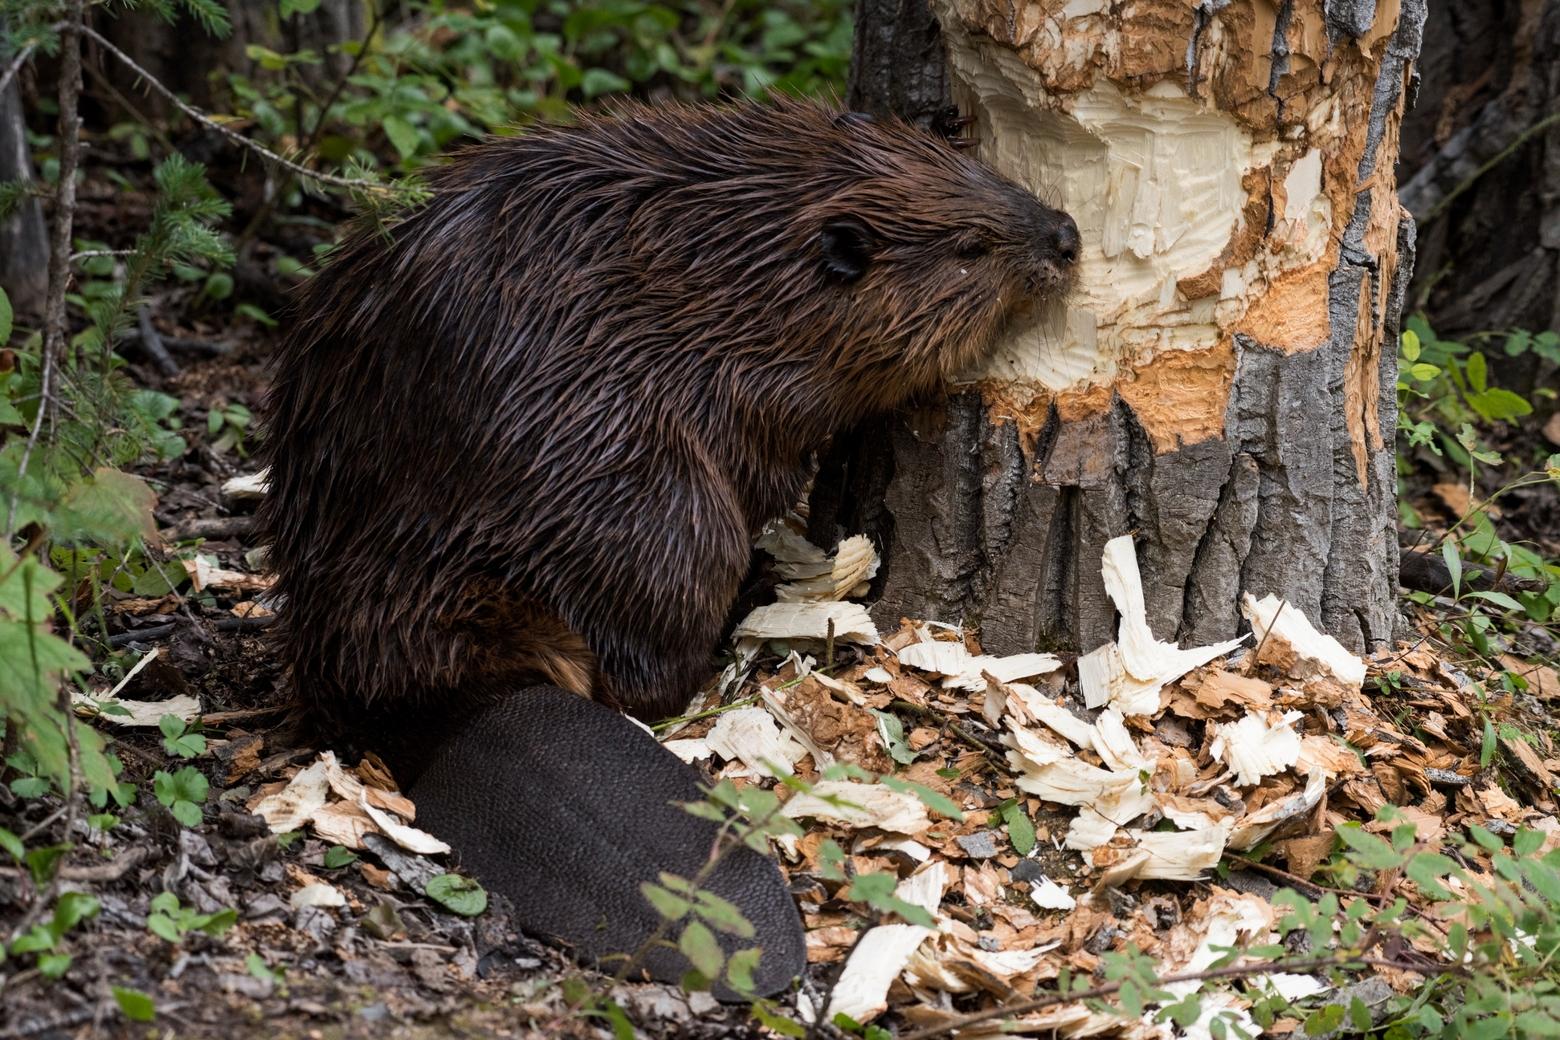 Beavers are a keystone species in Greater Yellowstone due to their ability to shape ecosystems that benefit plants, rivers and other wildlife. Photo courtesy NPS